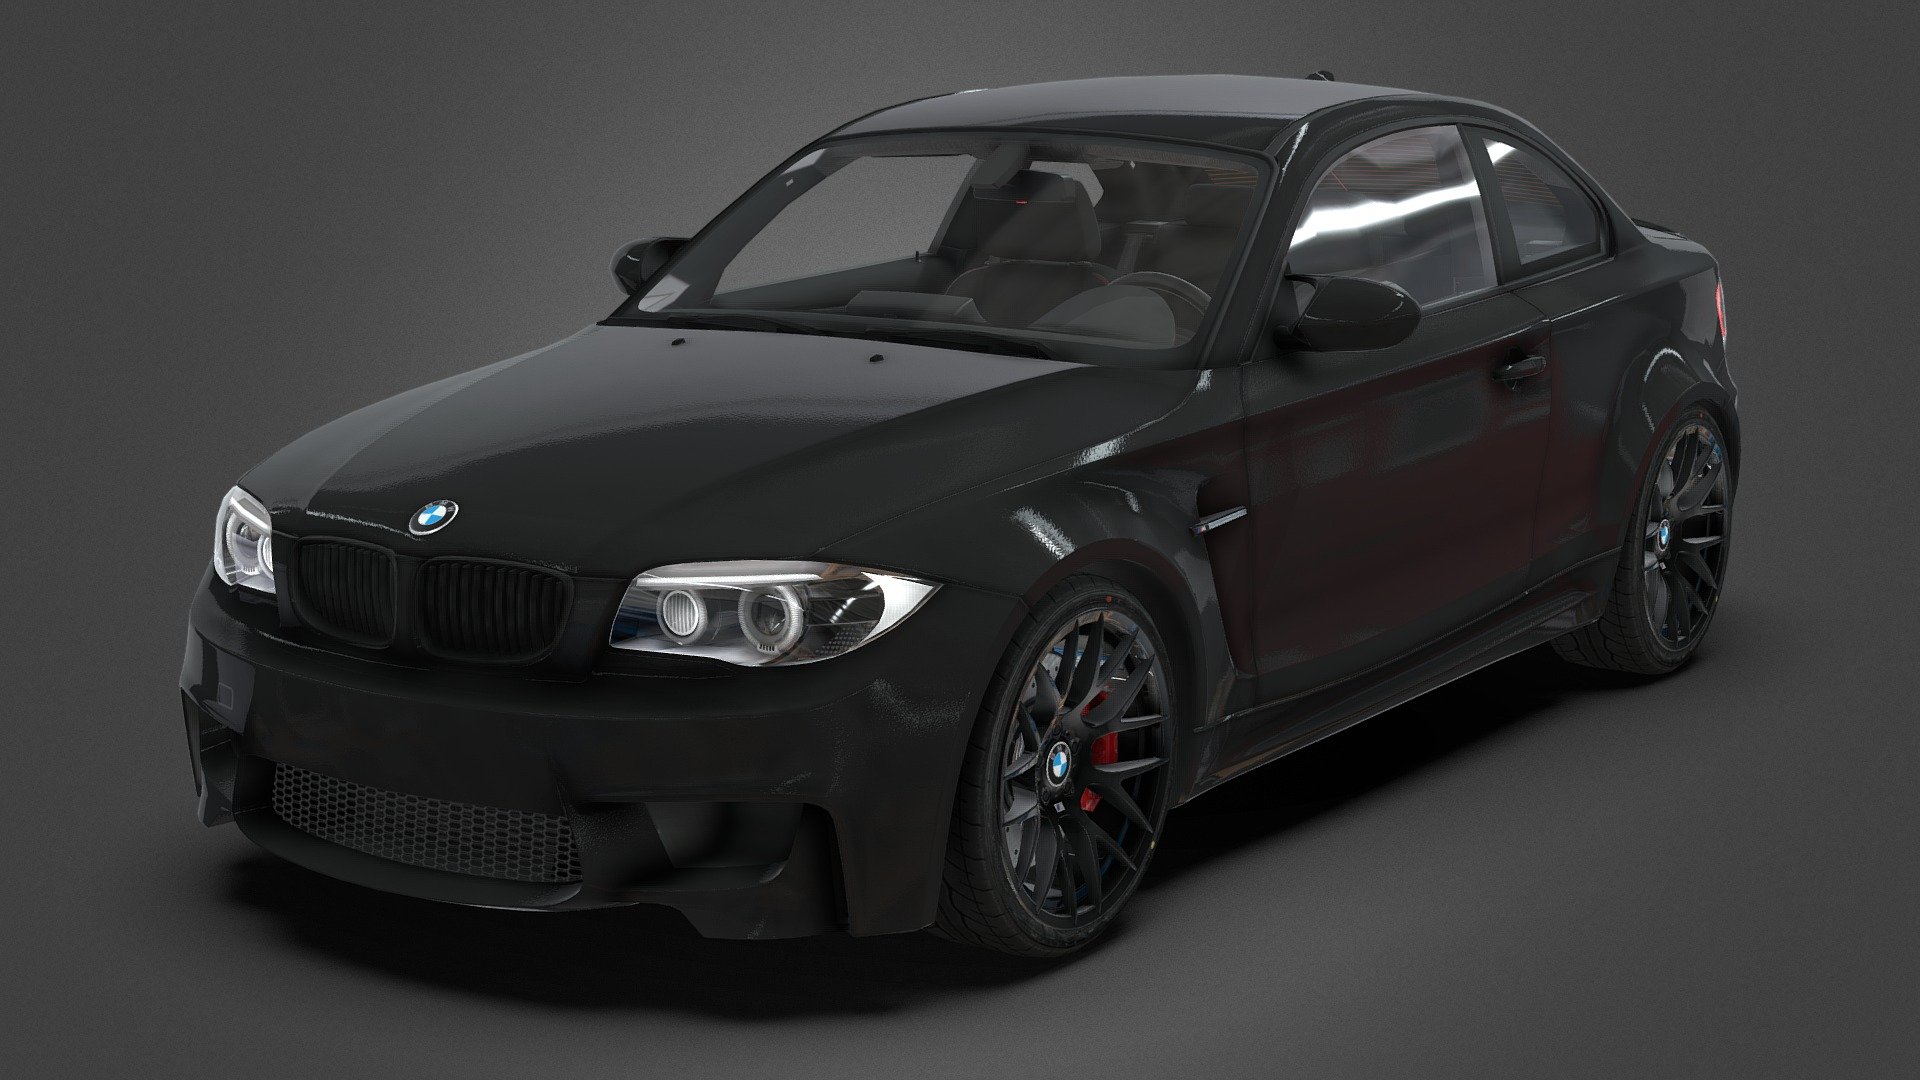 Bmw 1m Free 3d Model

BUY ASSETTO CORSA



FREE

Model From Asseto Corsa

game ready

Original

Contains textures
 - AC - Bmw 1m [FREE] - Download Free 3D model by DAVID.3D.ART (@david3dart) 3d model